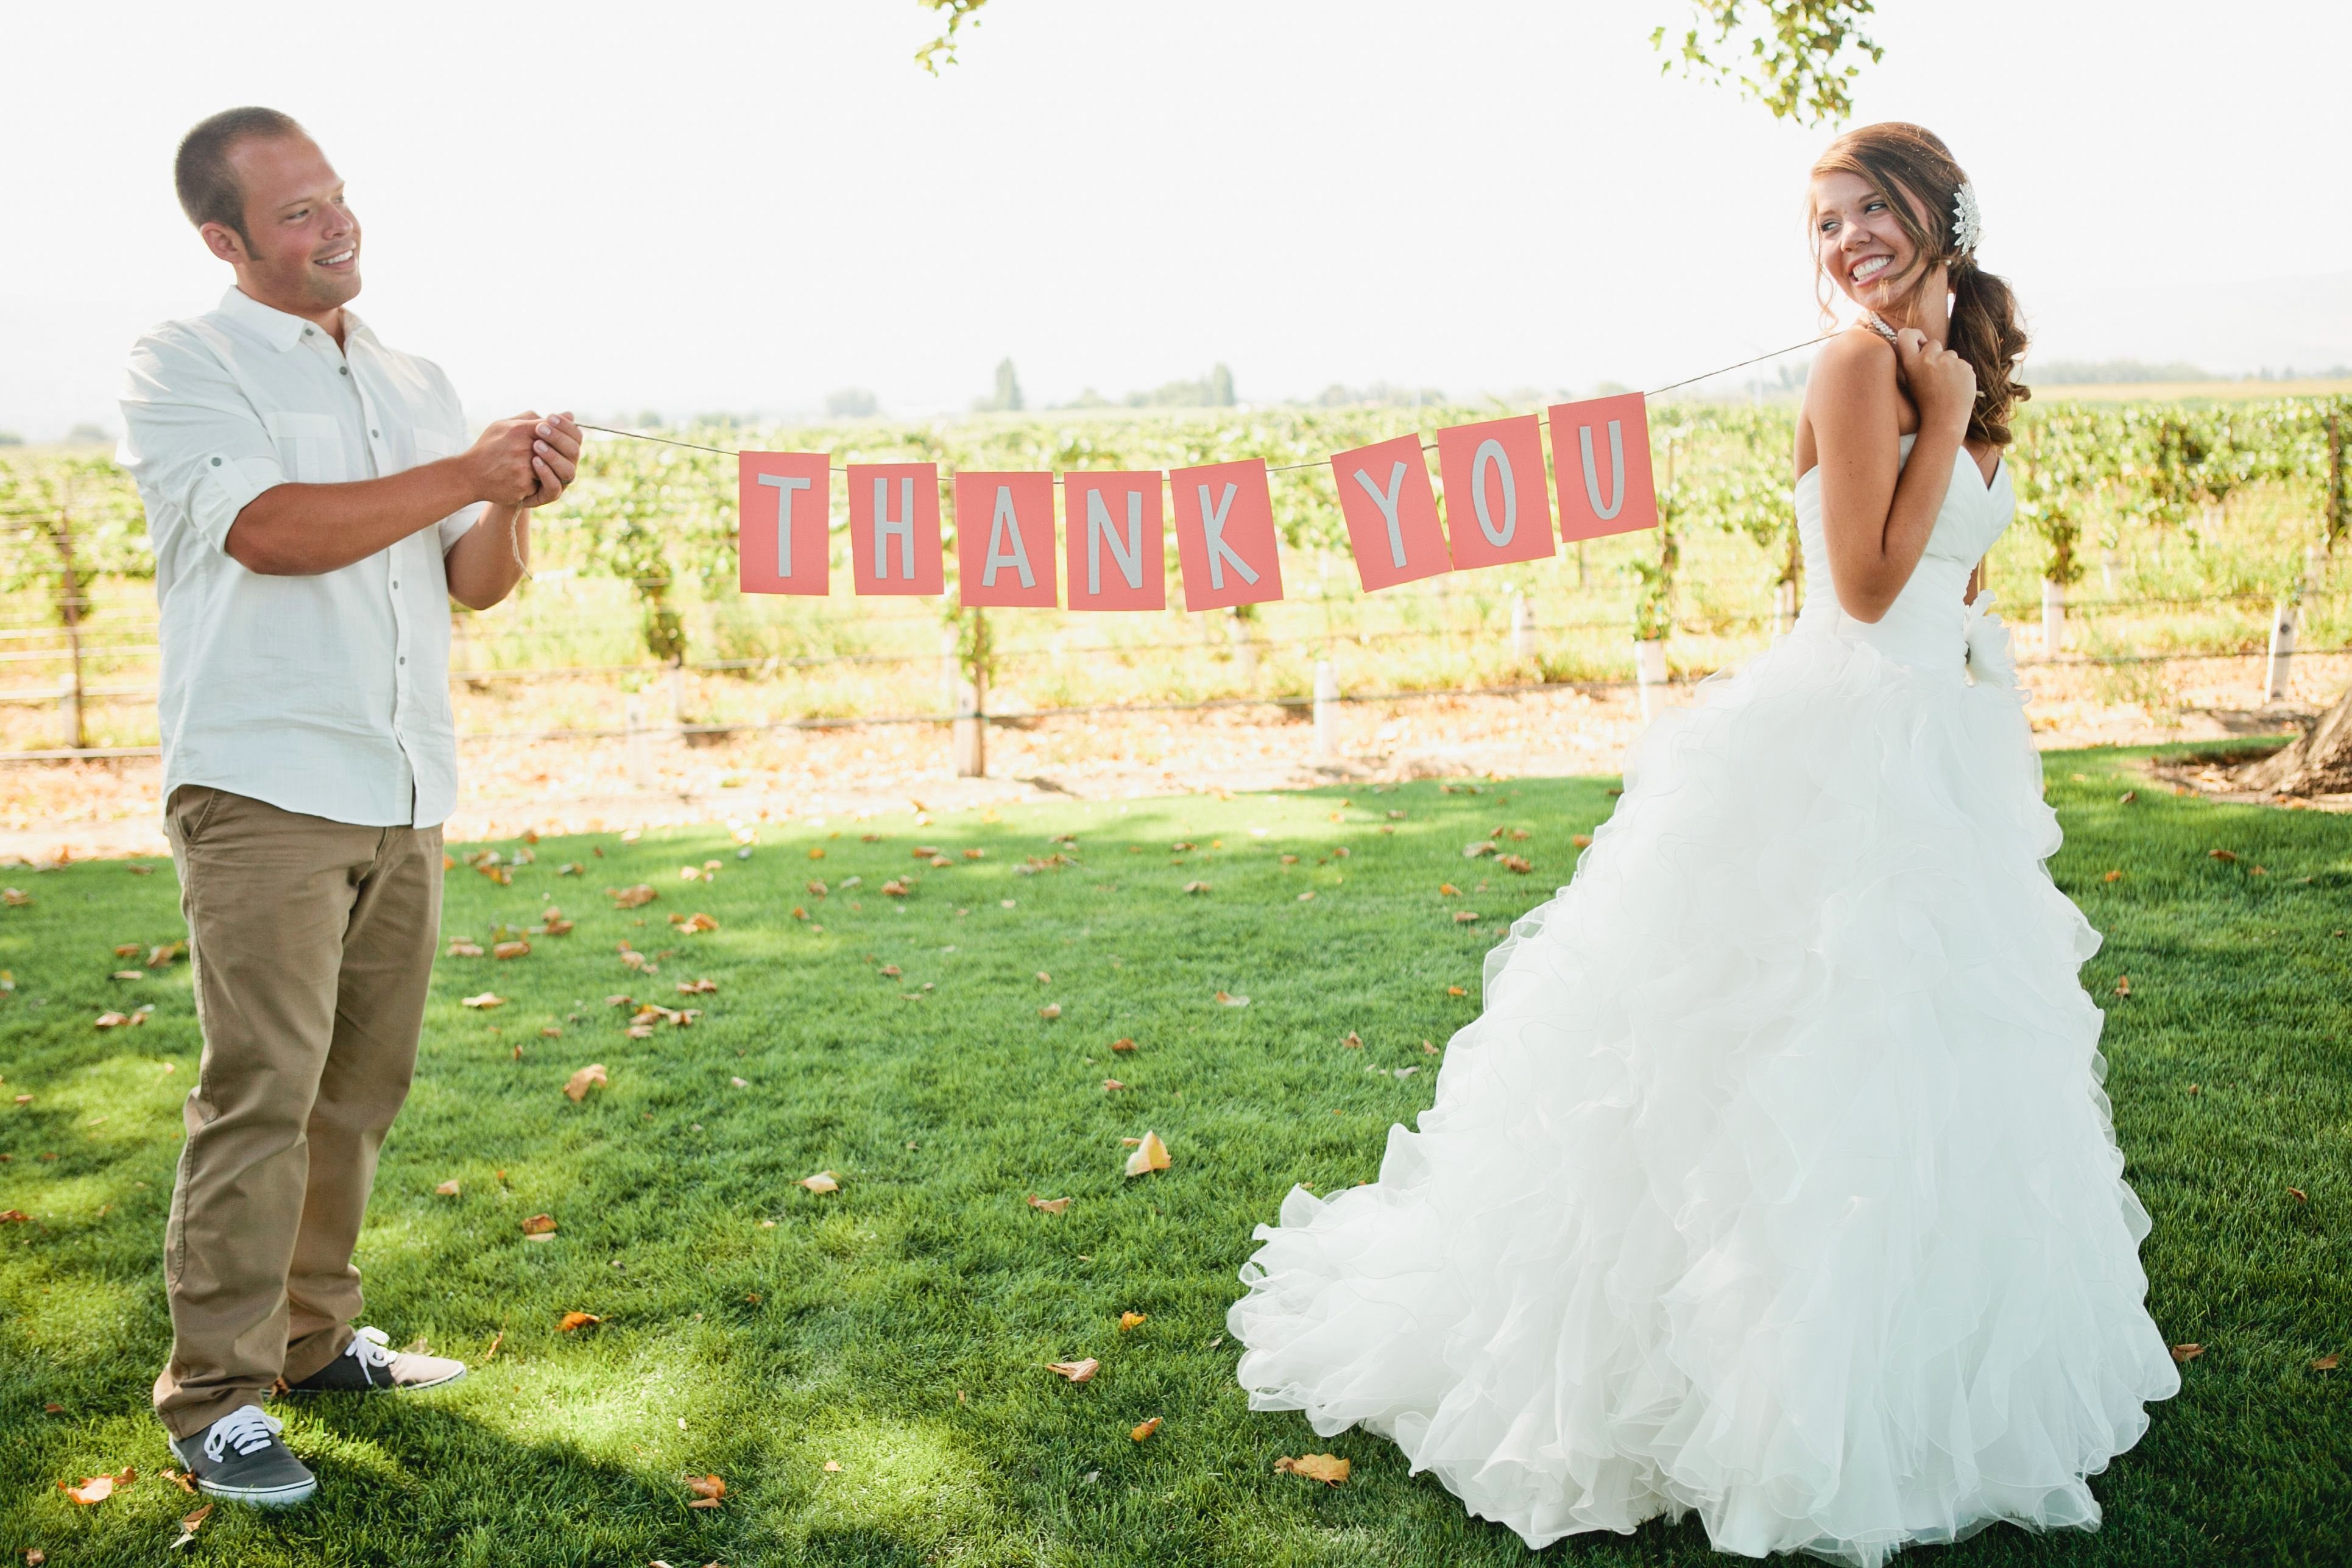 Thank You Banner Ideas Awesome Wedding Thank You Banner Wedding